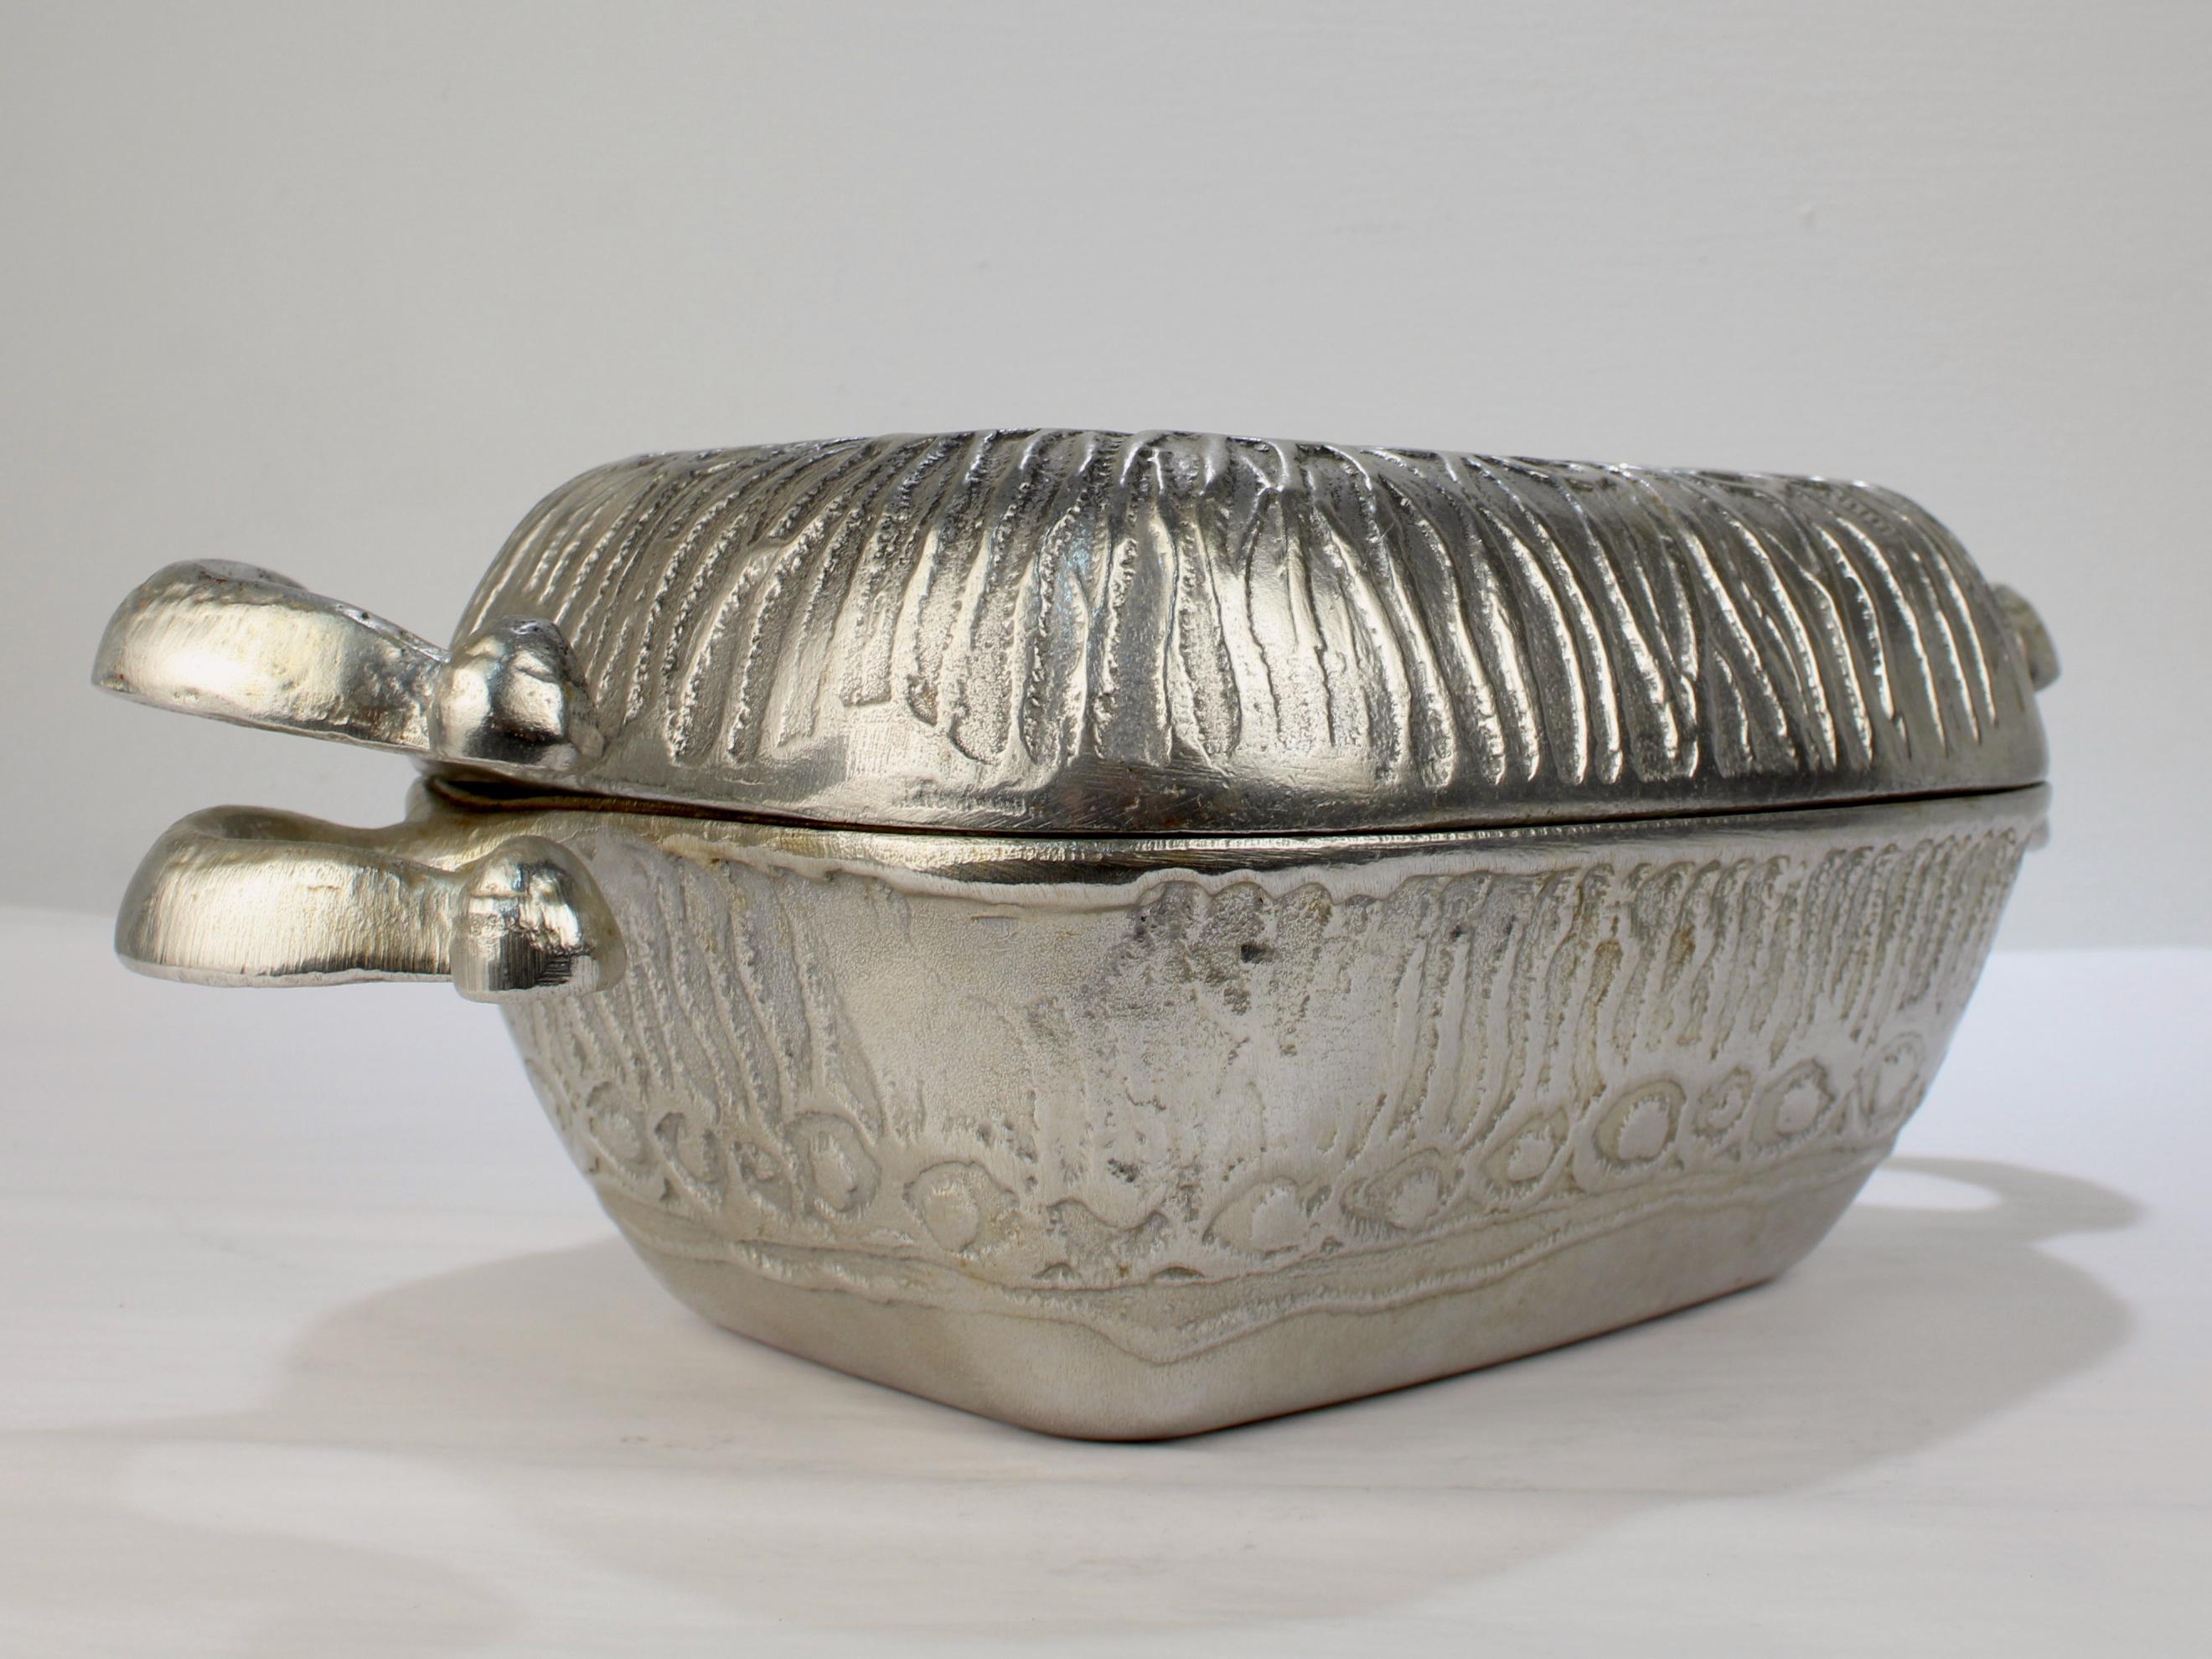 Vintage Donald Drumm Mid-Century Modern Aluminum Covered Casserole Dish / Tureen In Good Condition For Sale In Philadelphia, PA